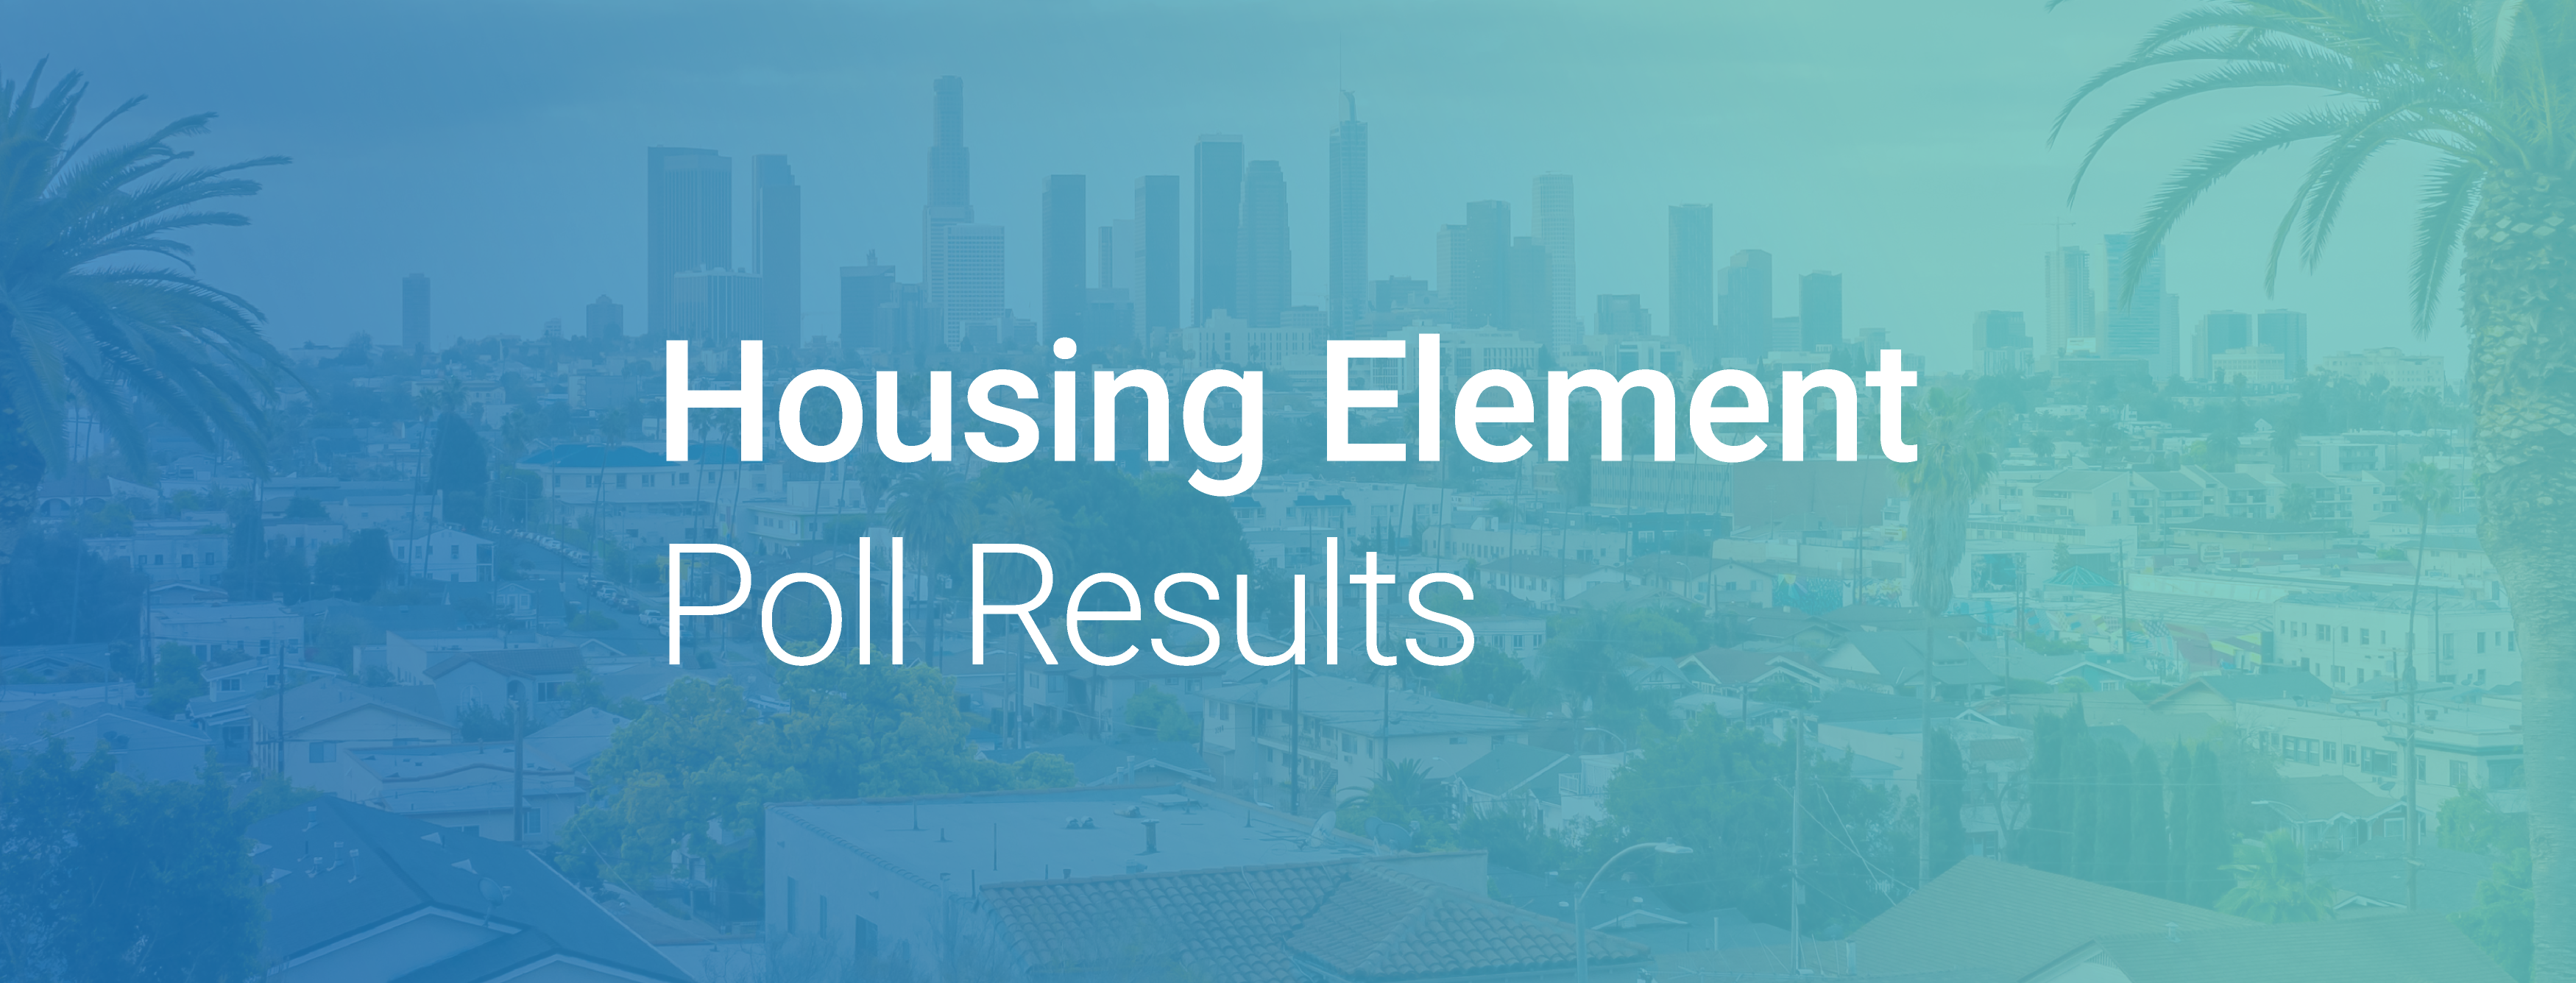 Housing Element Poll Results 